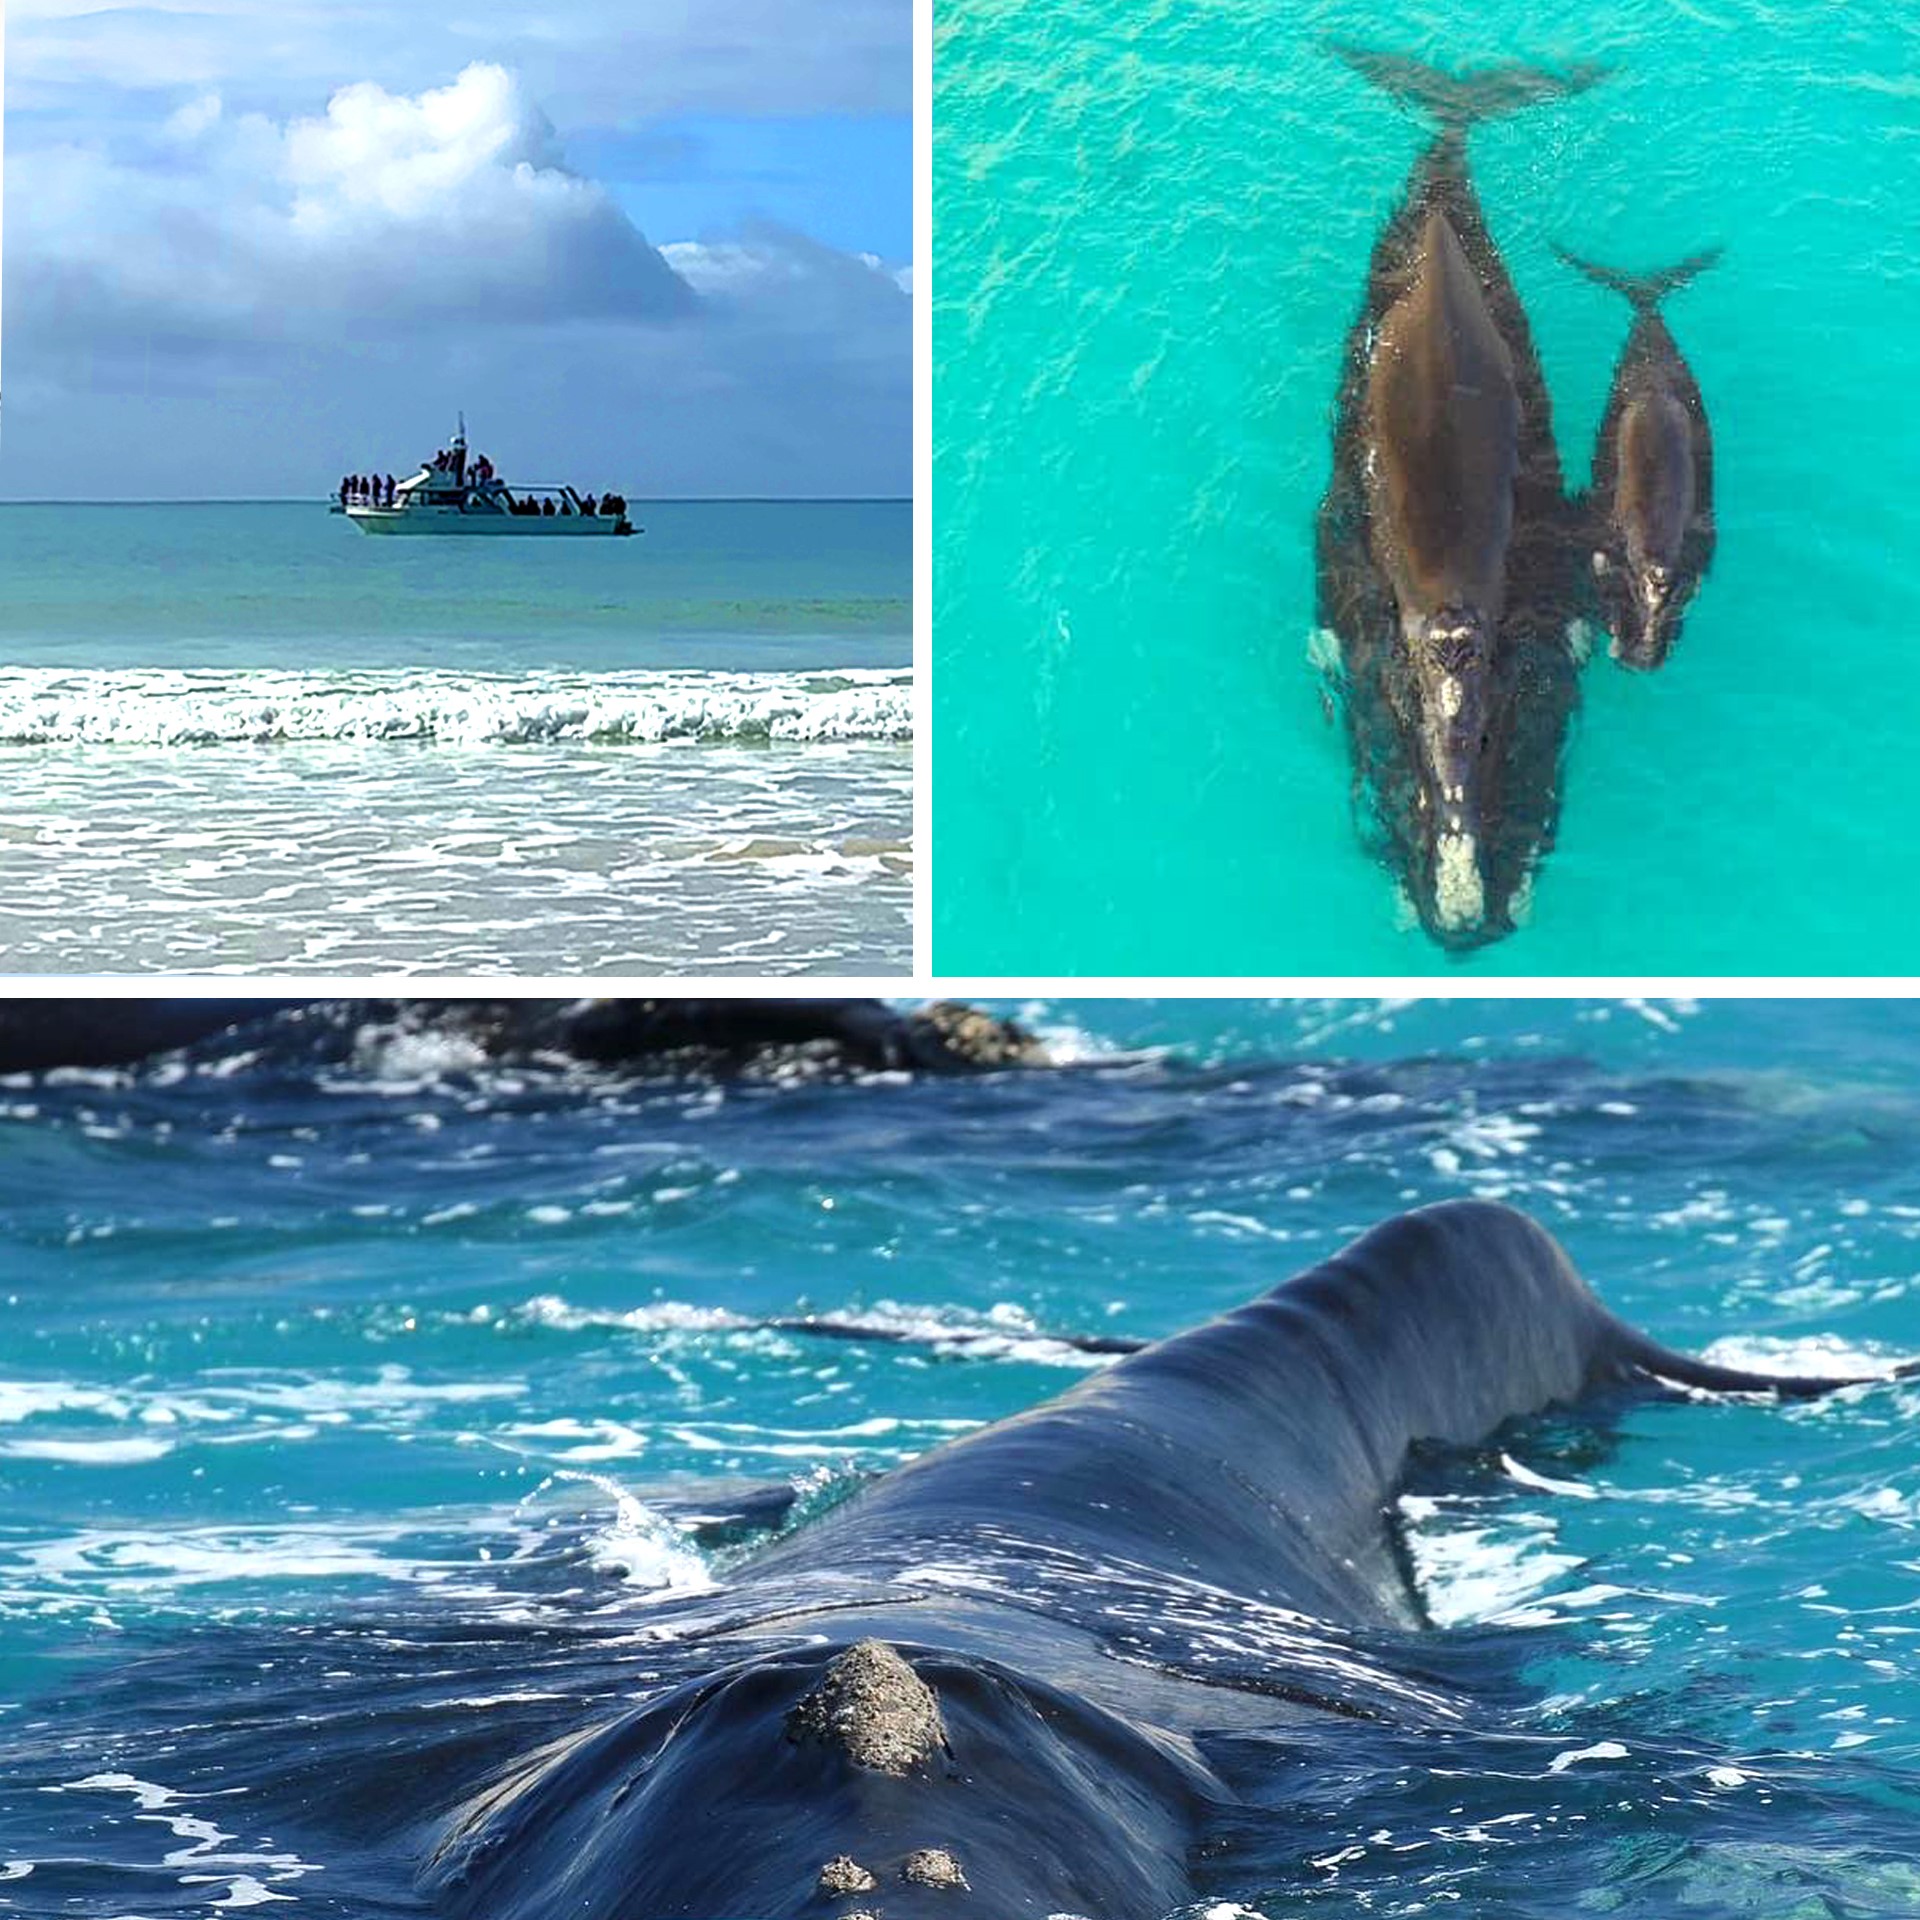 Top left boat on water, top right whale and calf drove shot, bottom, close up of whale